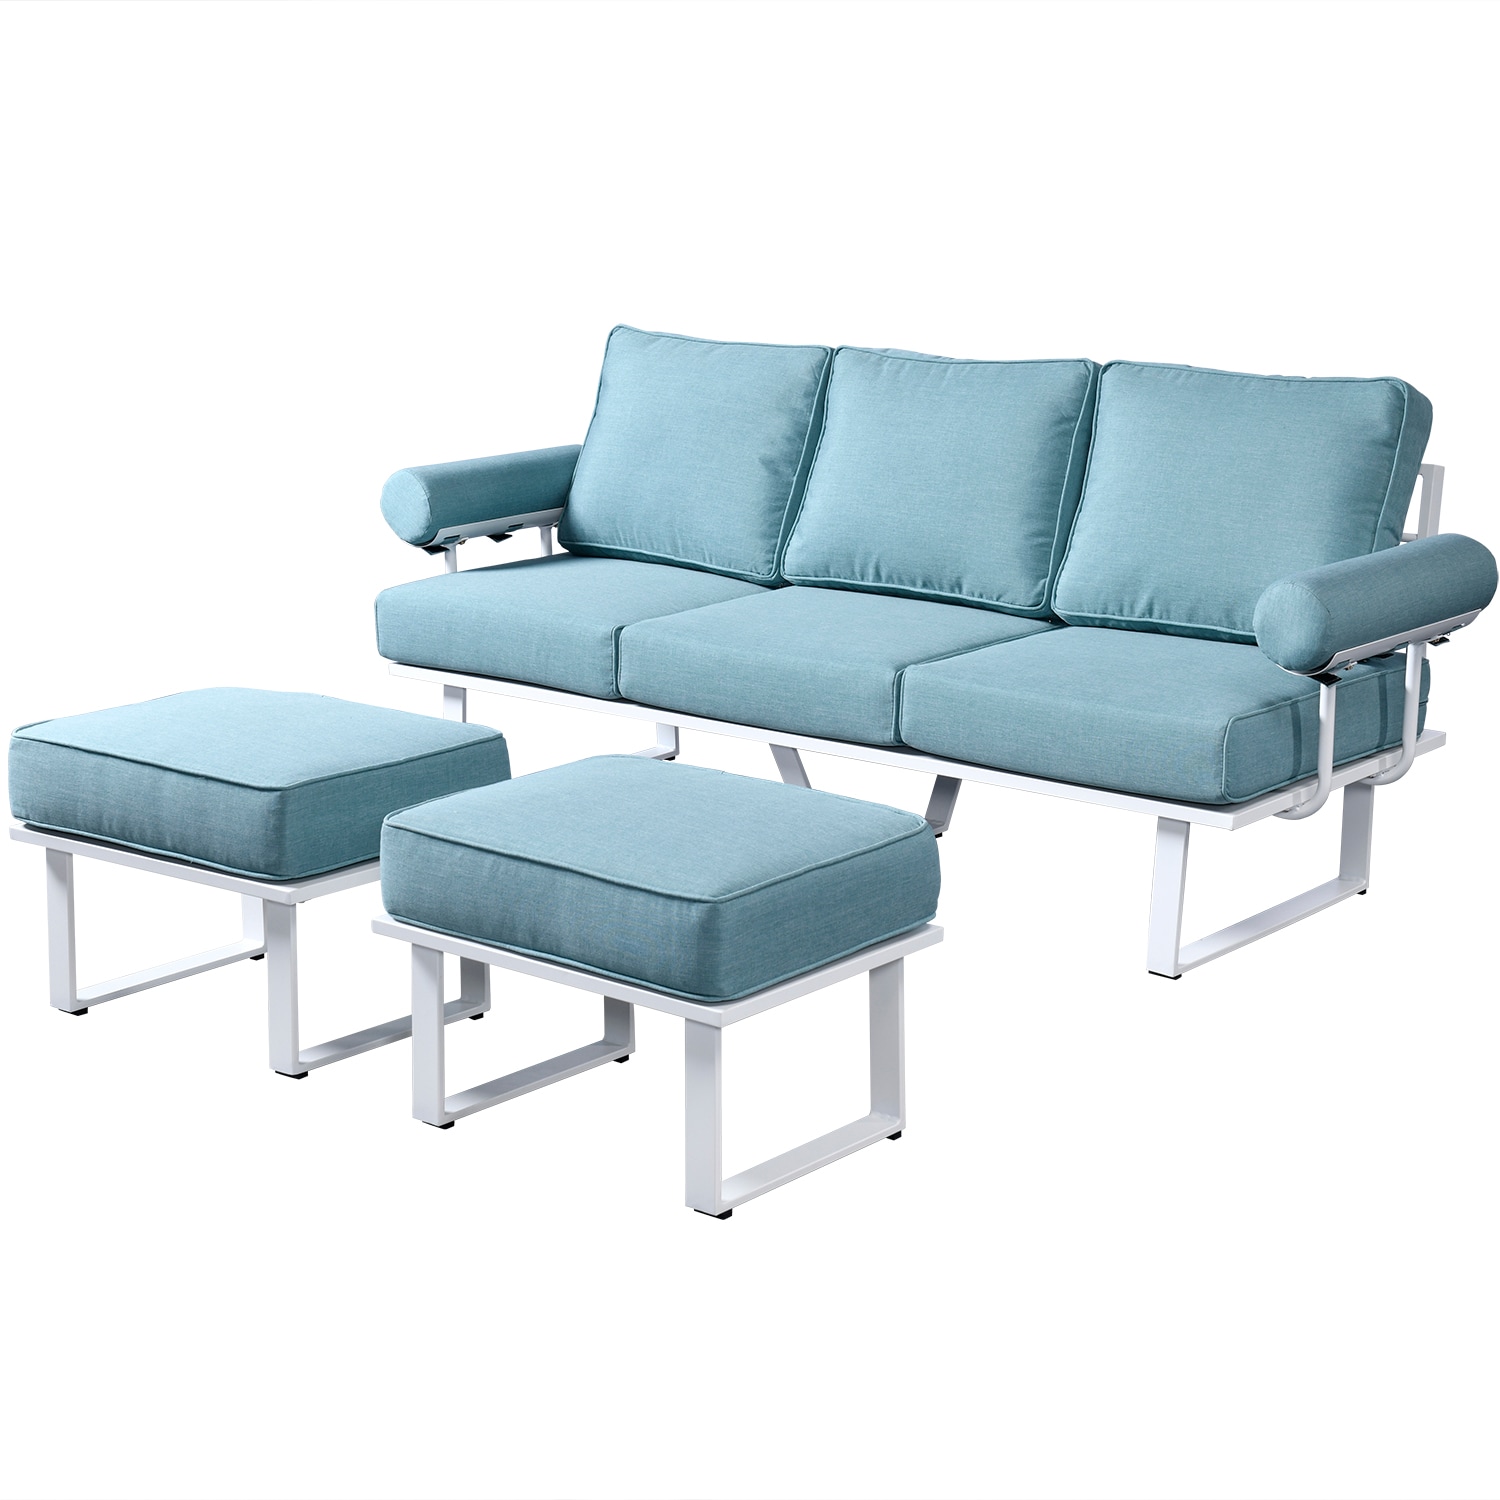 XIZZI Athena Outdoor Sofa with Blue Cushion(S) and Aluminum Frame 